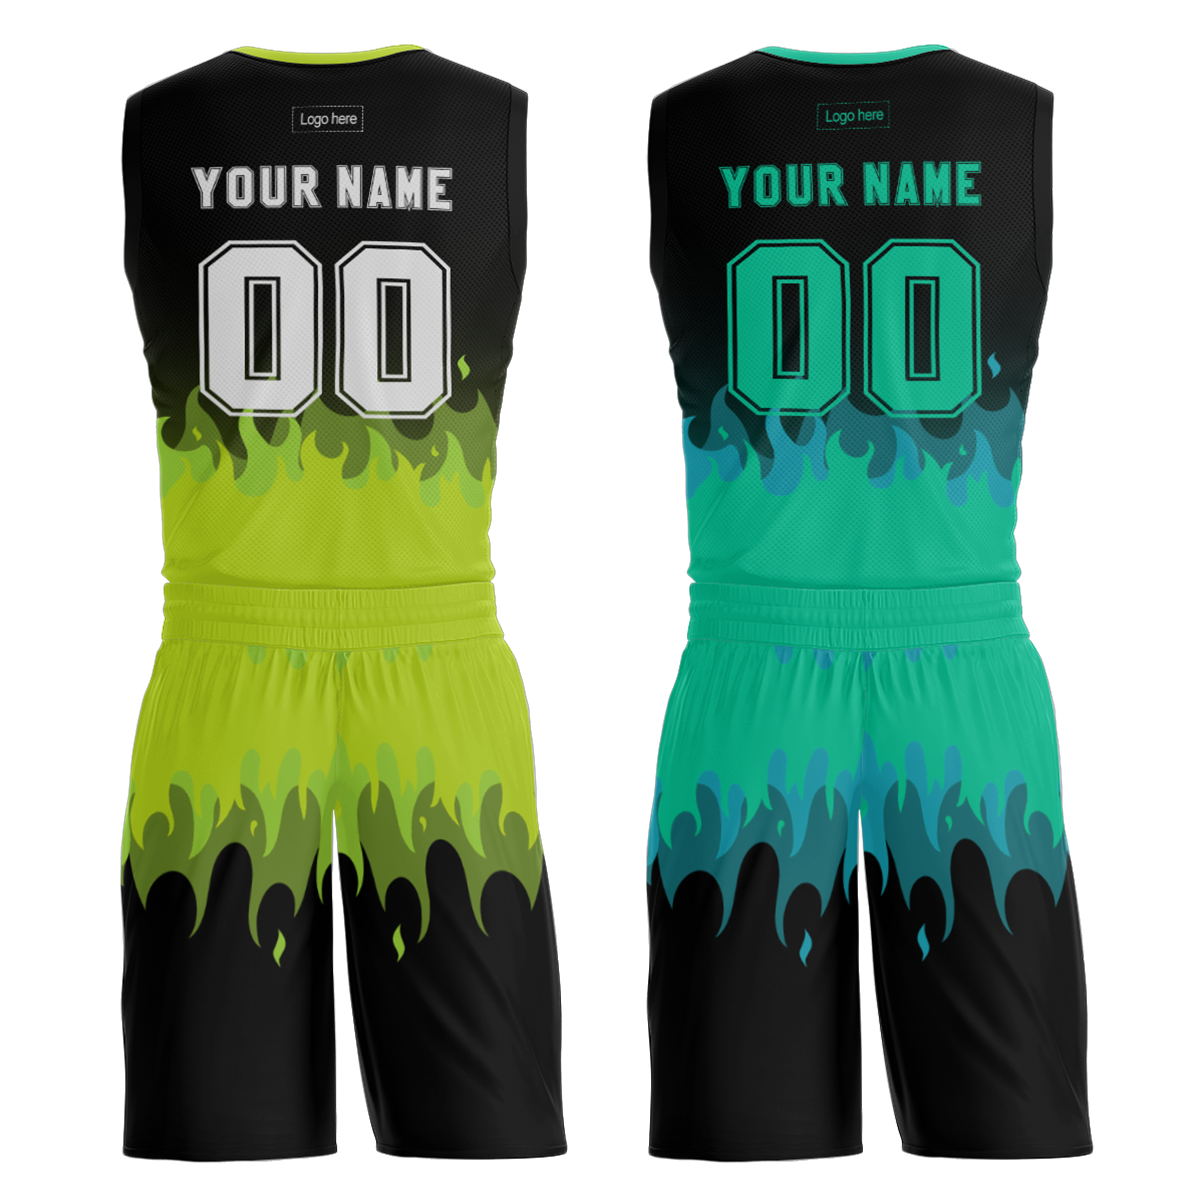 Wholesale Custom Basketball Jerseys Sublimation Printed Reversible Mesh Performance Athletic Team Uniforms for Sports